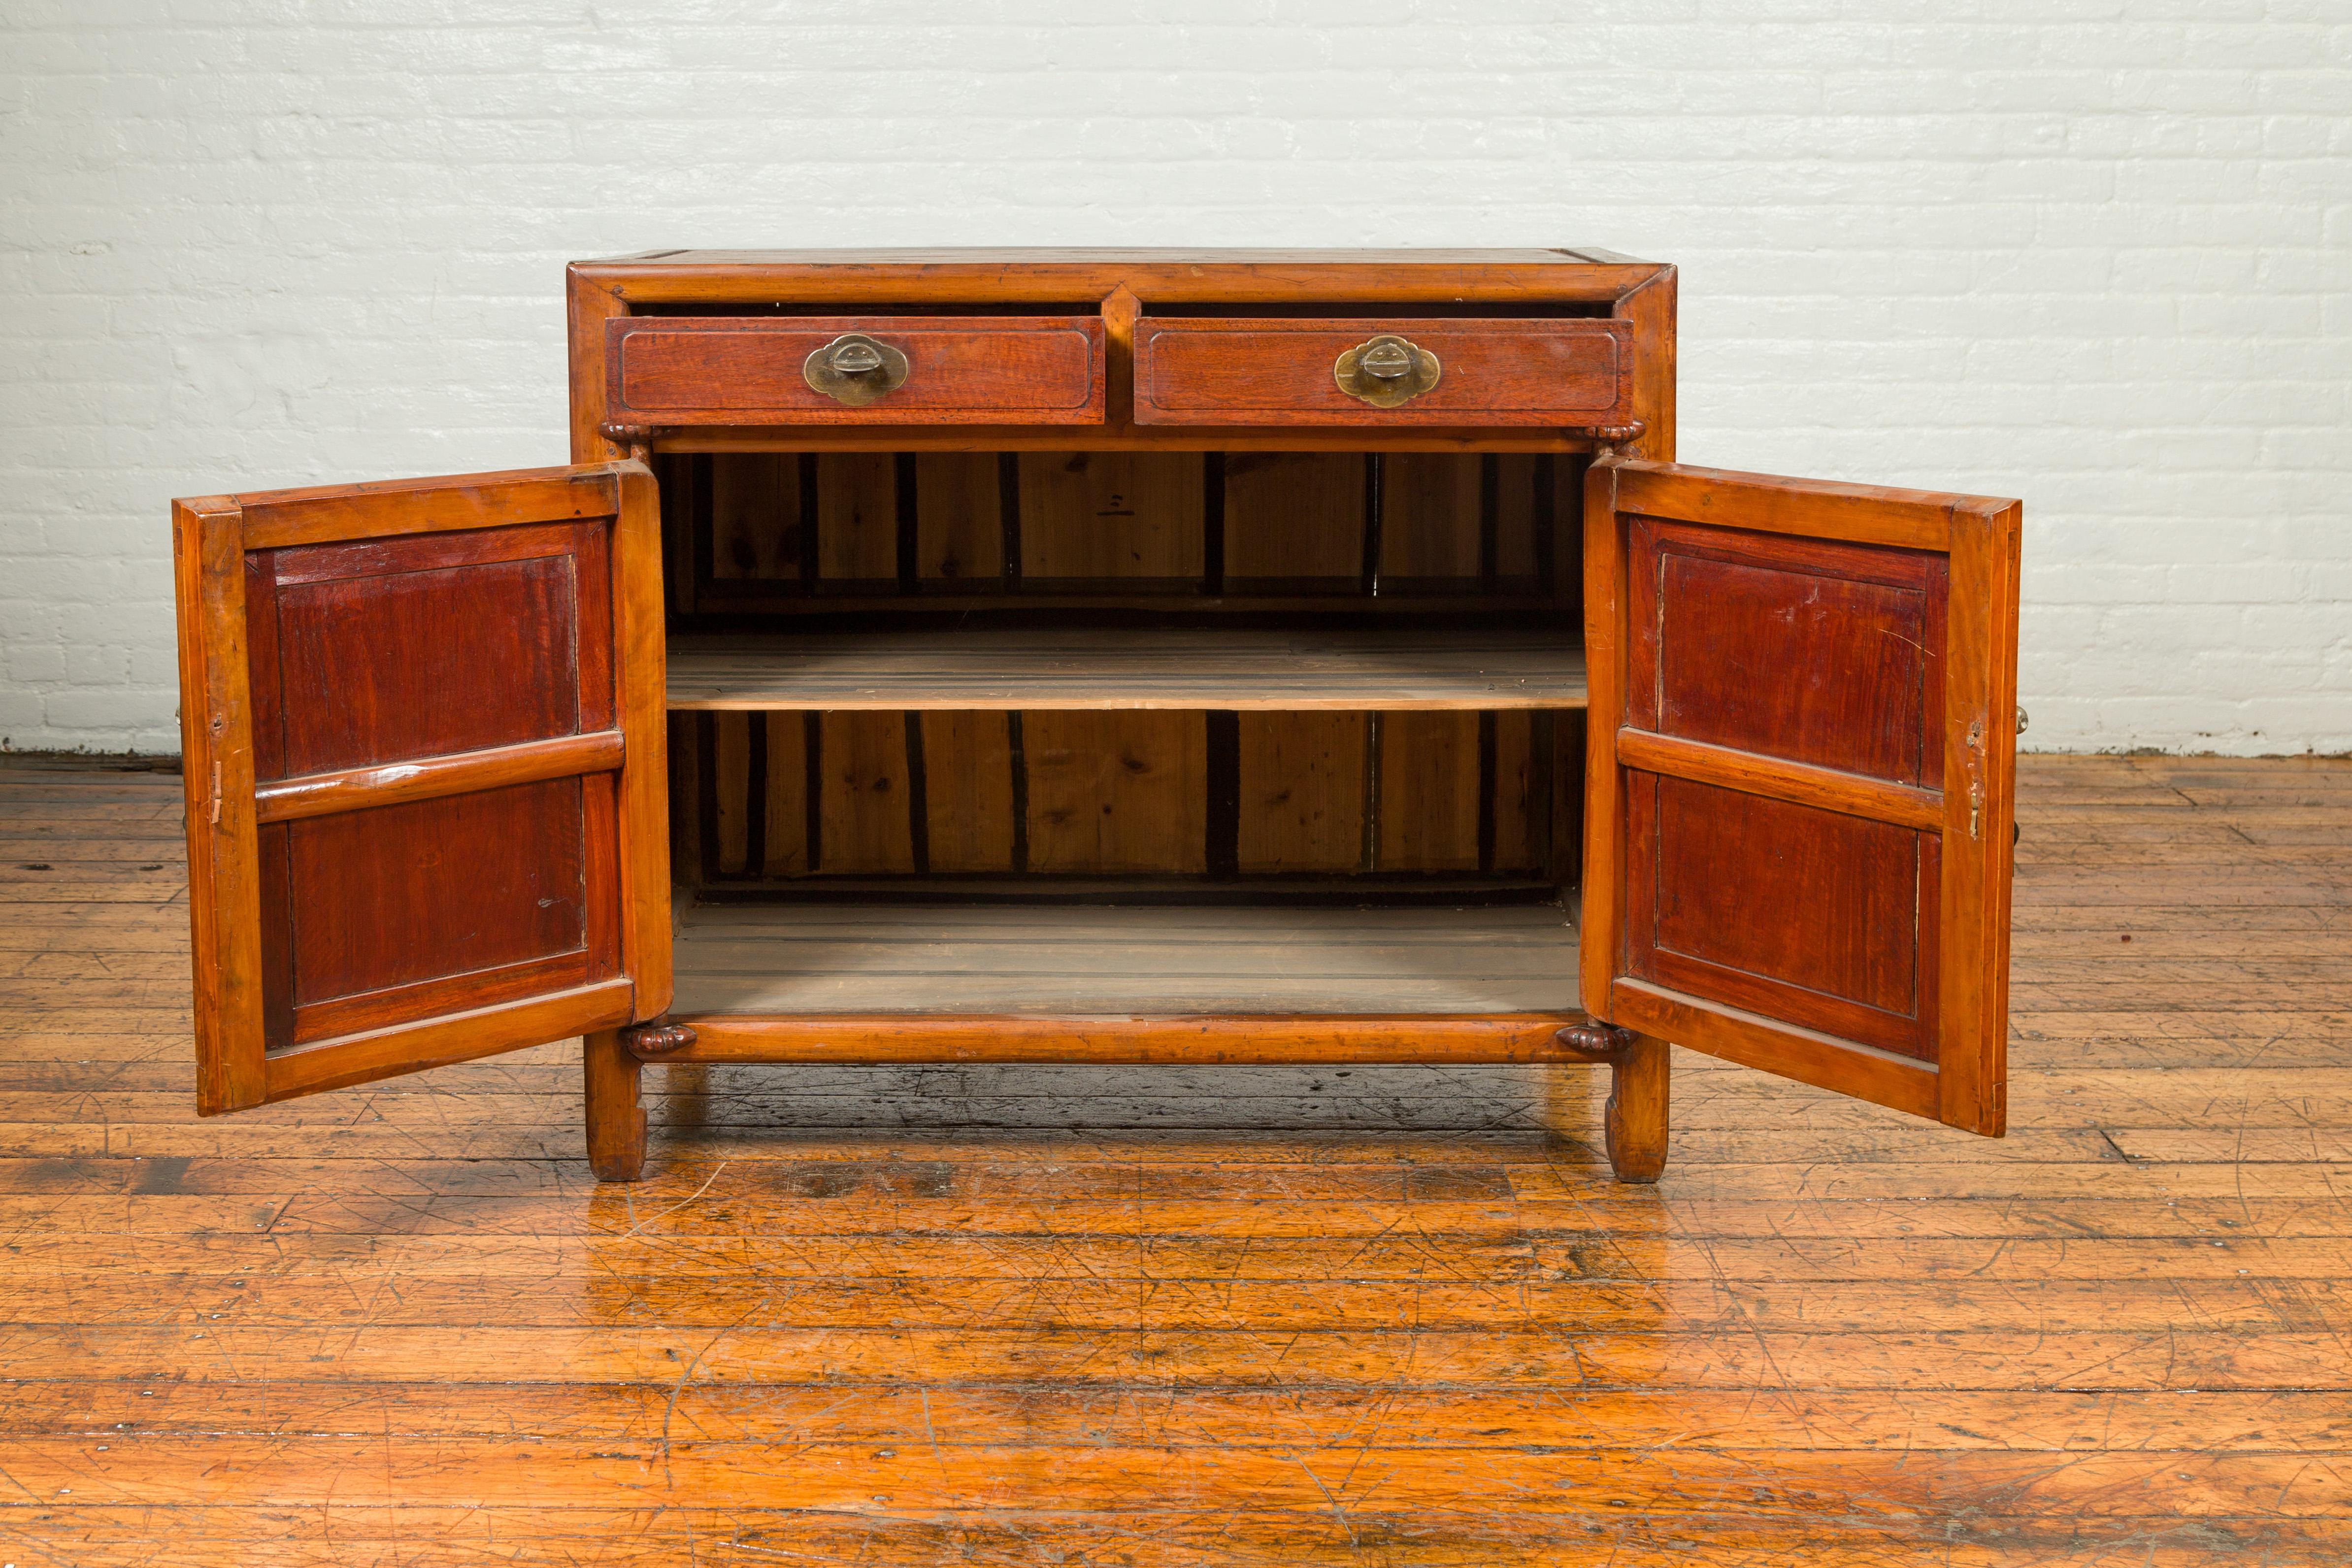 20th Century Vintage Chinese Two-Toned Cabinet with Drawers, Doors and Bronze Hardware